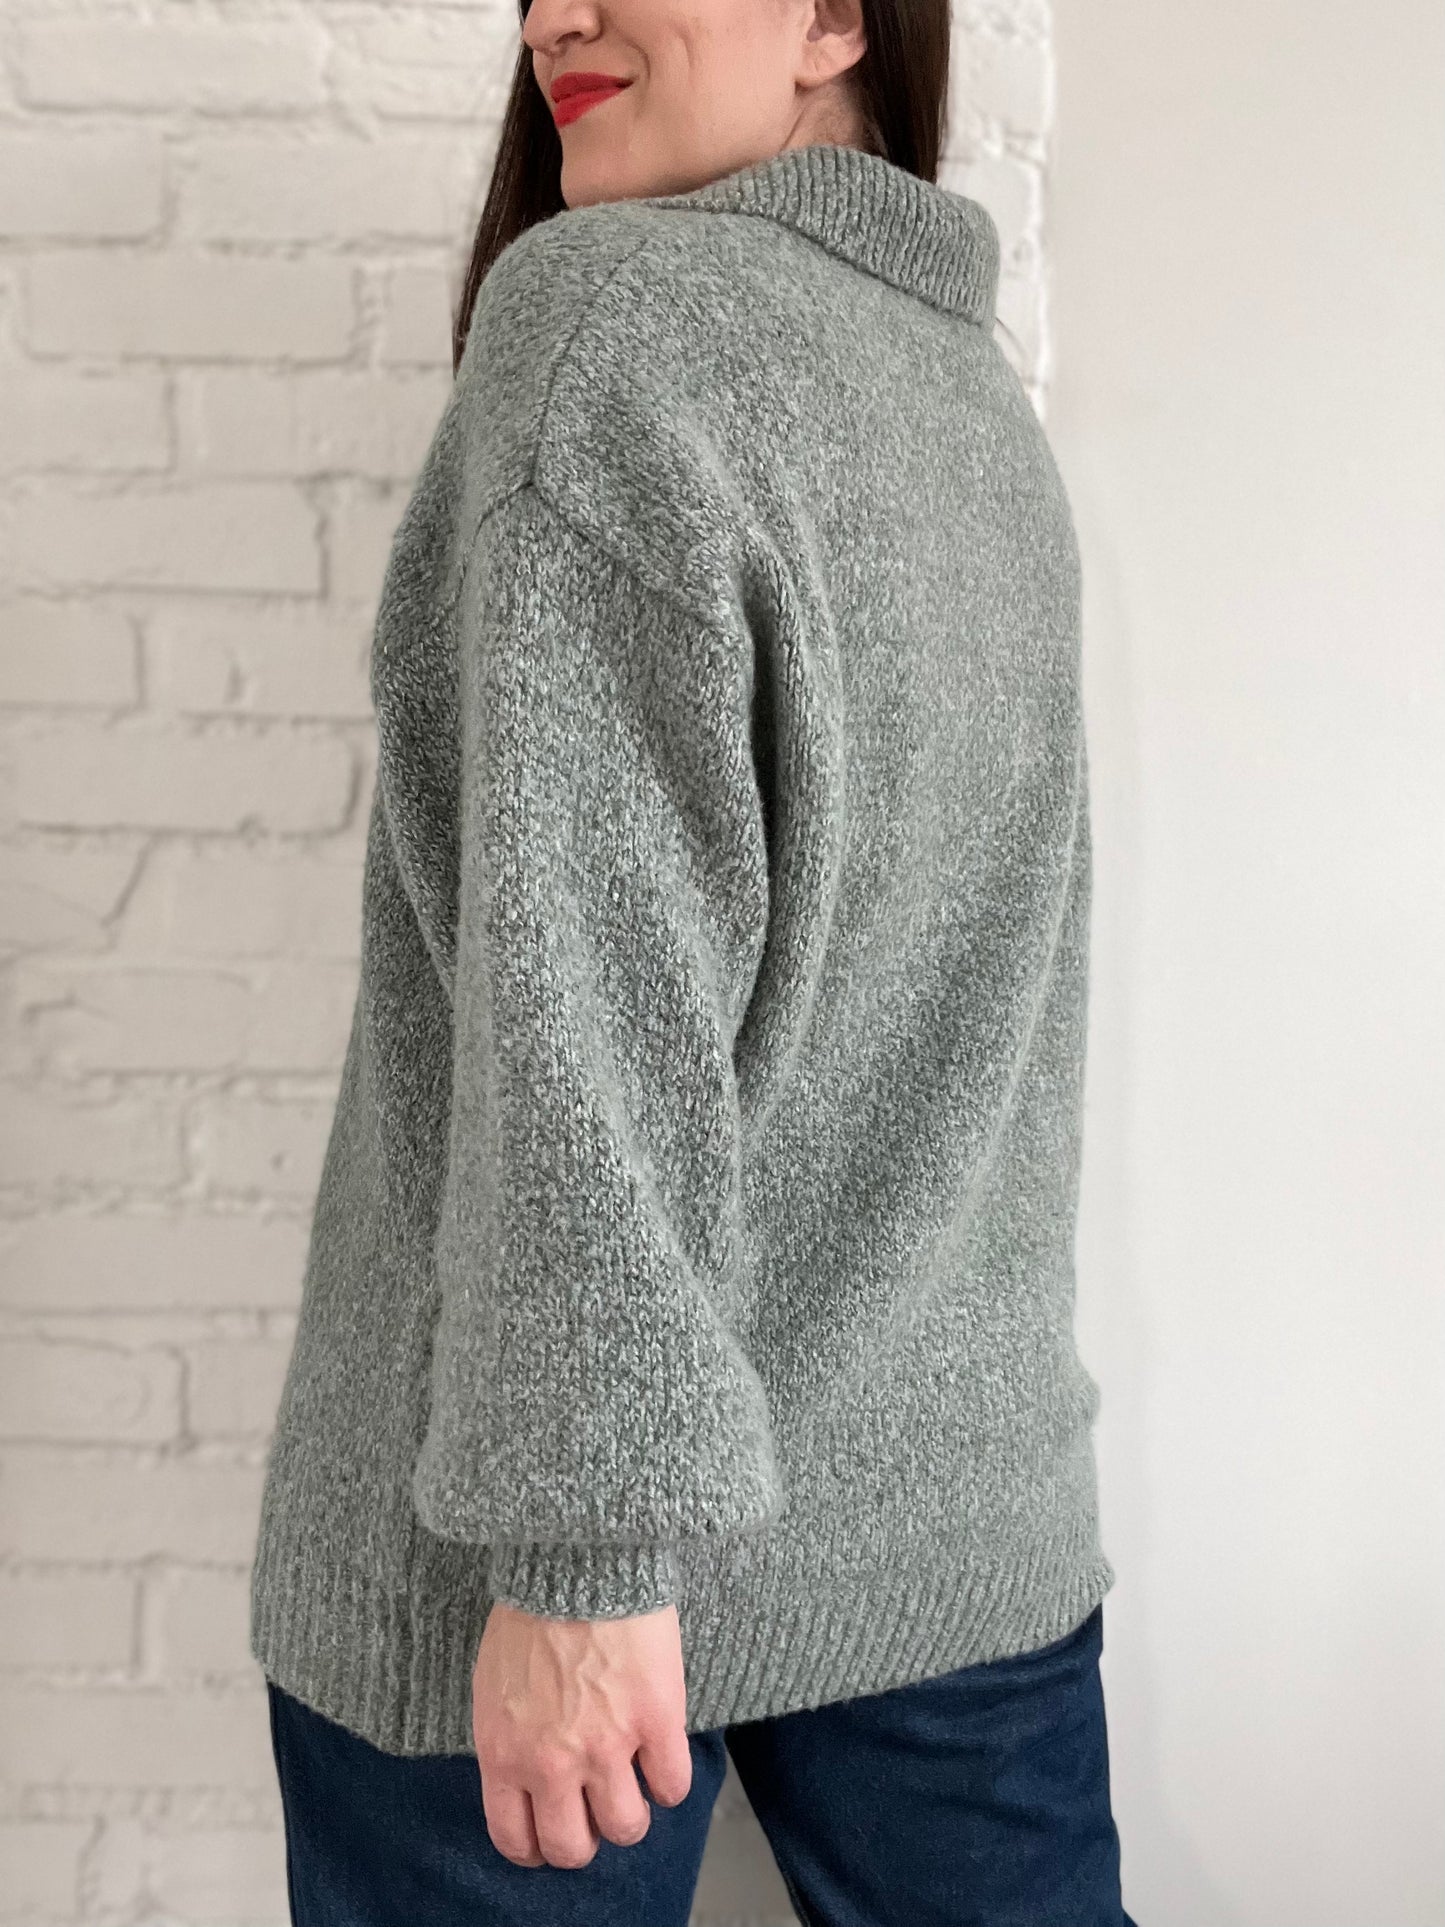 Sage Green Oversized Knit - S